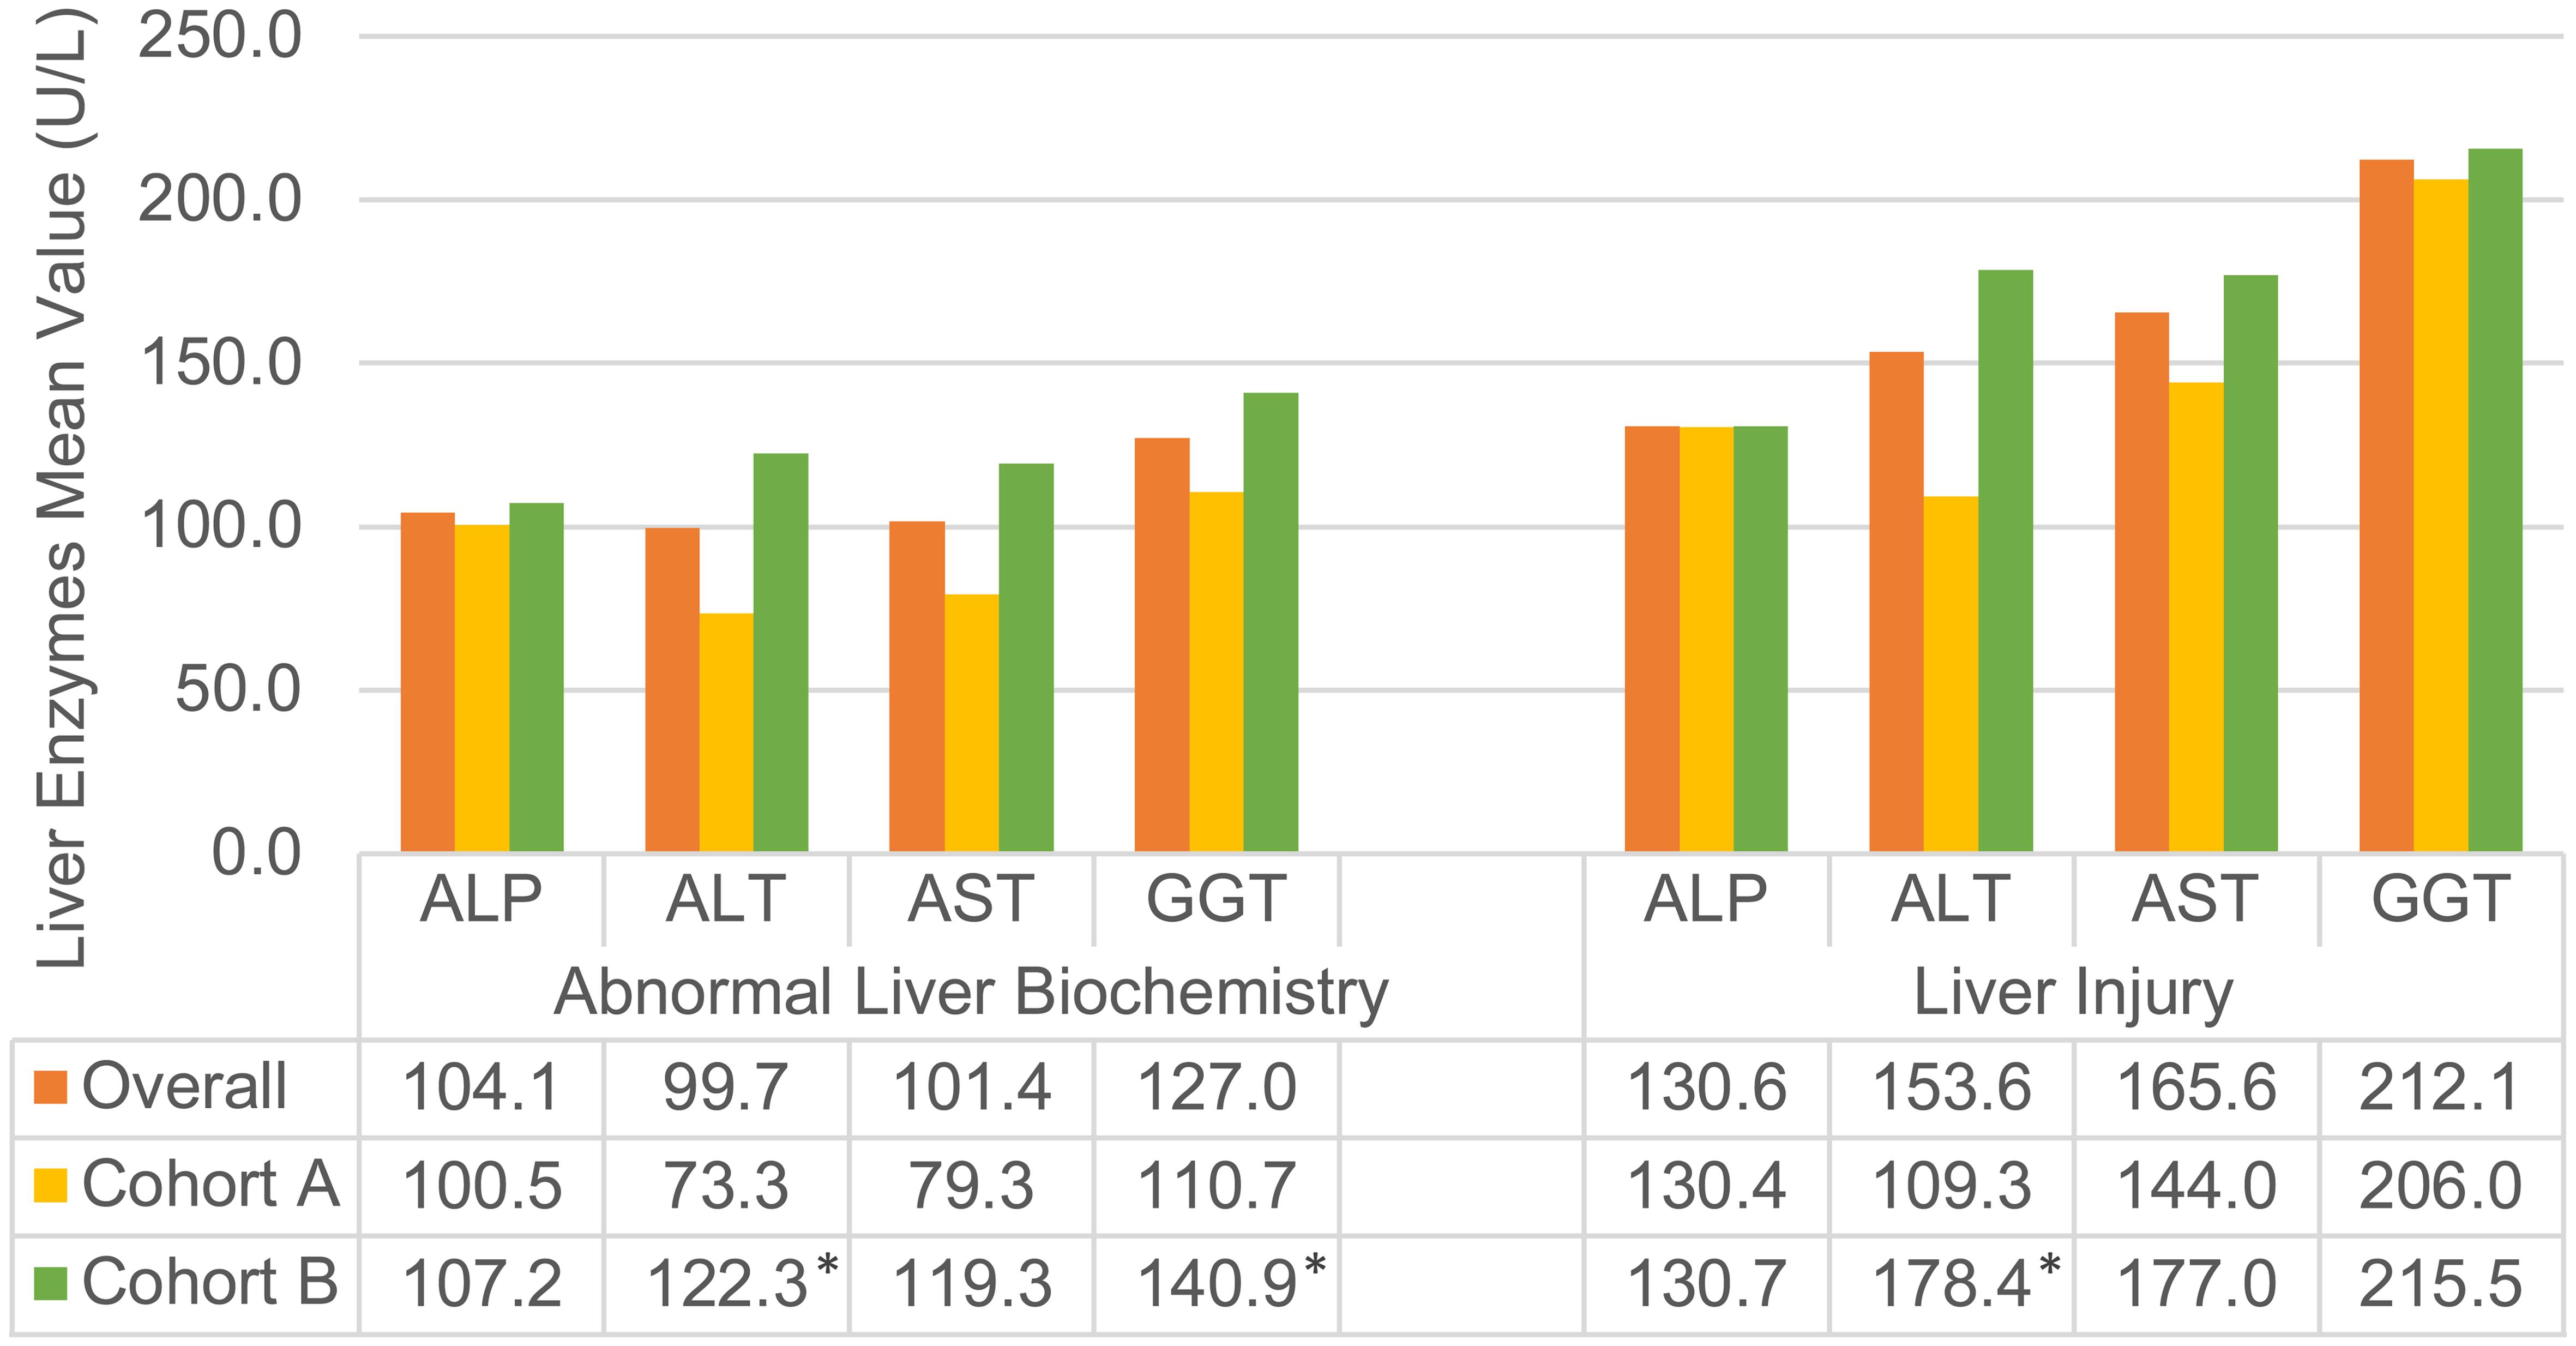 Liver biochemistry of COVID-19 patients with abnormal liver biochemistry and liver injury.